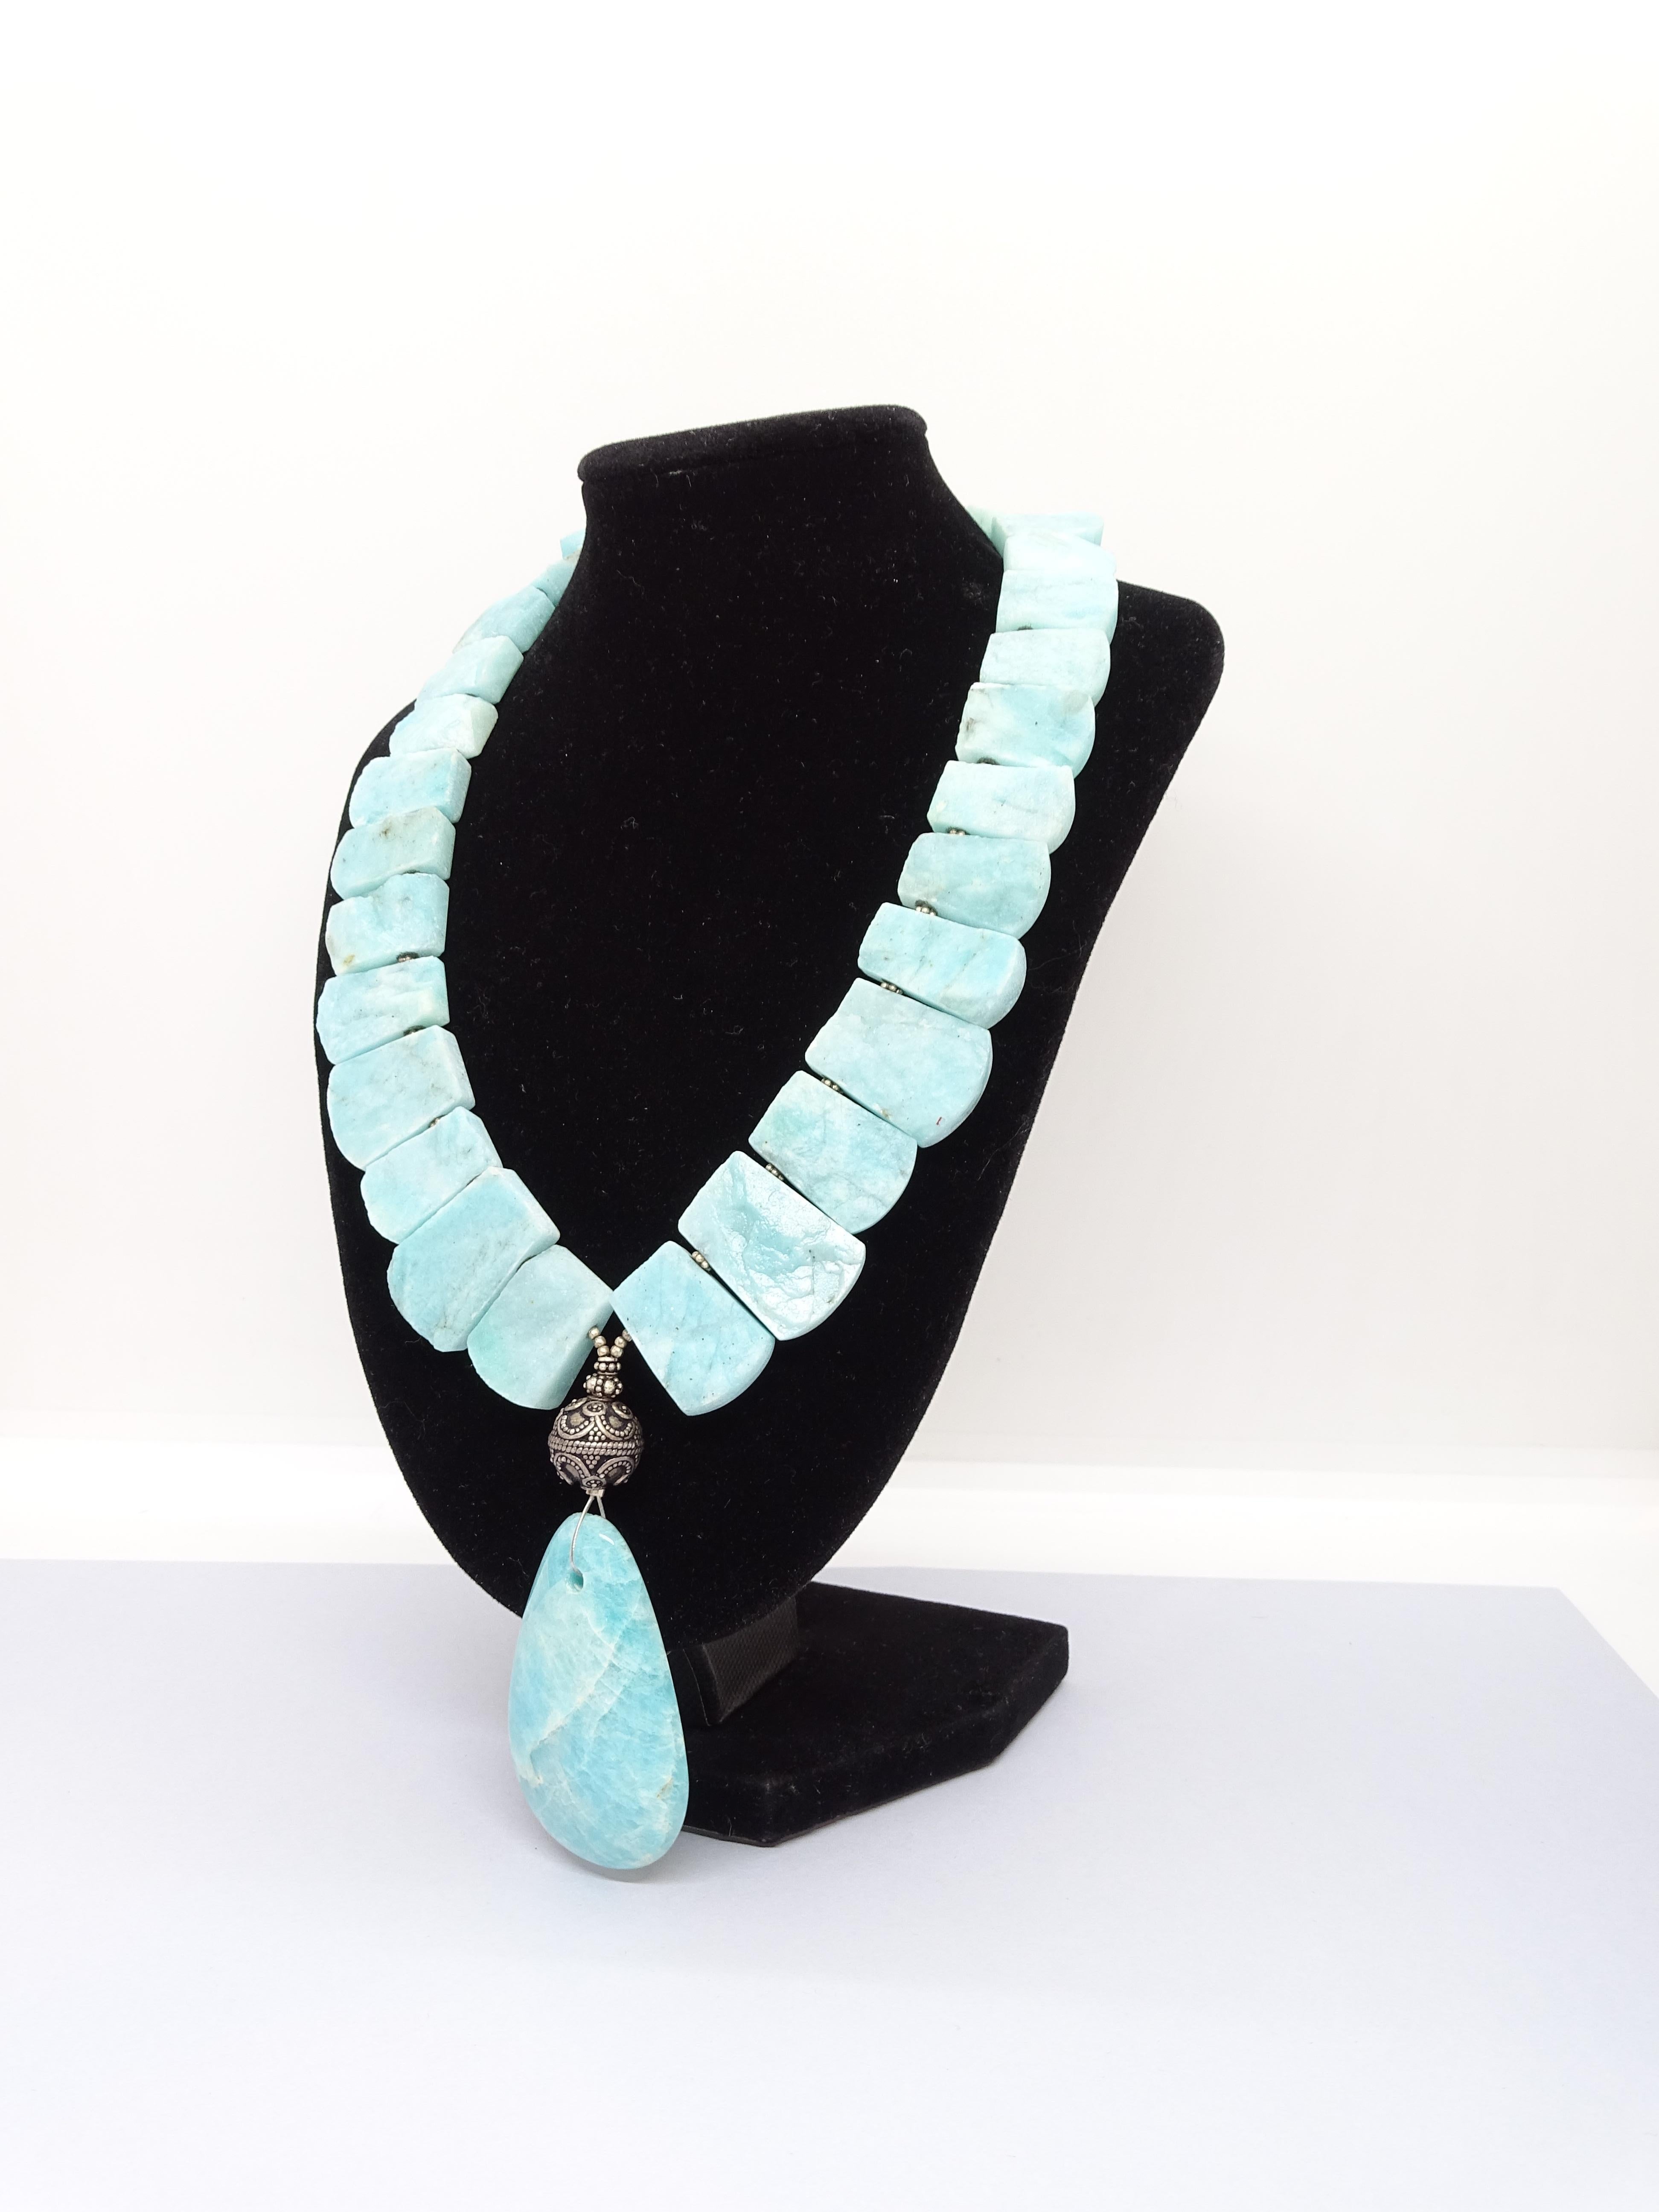 Amazonite and silver  French Pendant  Necklace, France  2